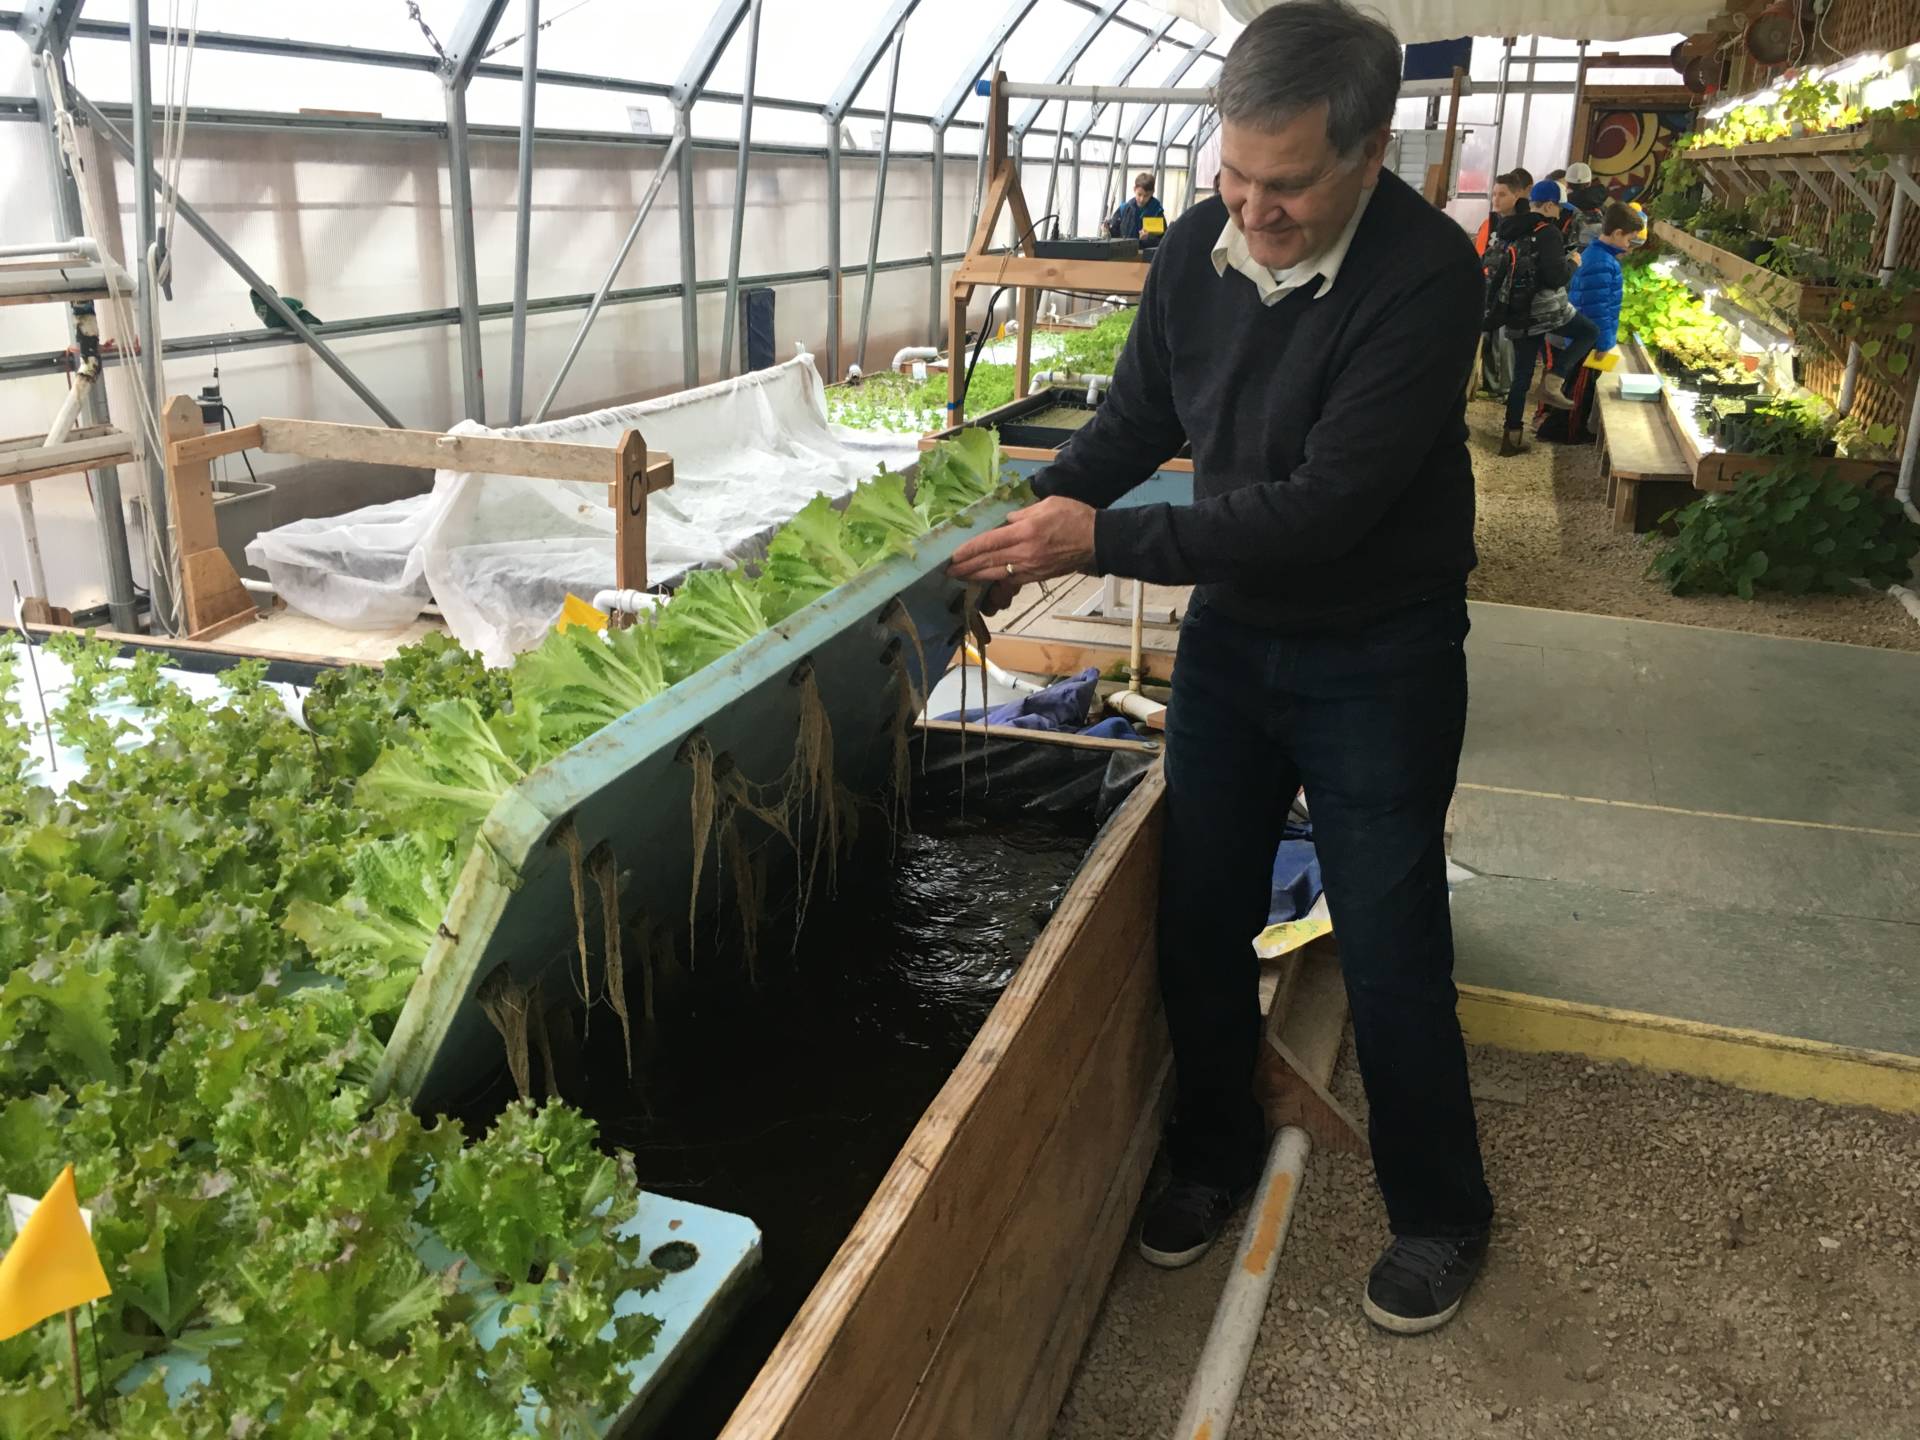 This is Pat Wilborn owner of PortFish, an aquaponics farm in Port Washington, WI. My 6th grade students were there last week for an urban farming/sustainability expedition. The water these plants grown in are a part of a closed loop system that also grows fish. Basically the plants, bacteria in the filters, and fish form a self cleaning system where the waste products of one, become the nutrients for the other. Pat can grow year round using this system using less energy, resources, and space even in the harsh winters in Wisconsin.